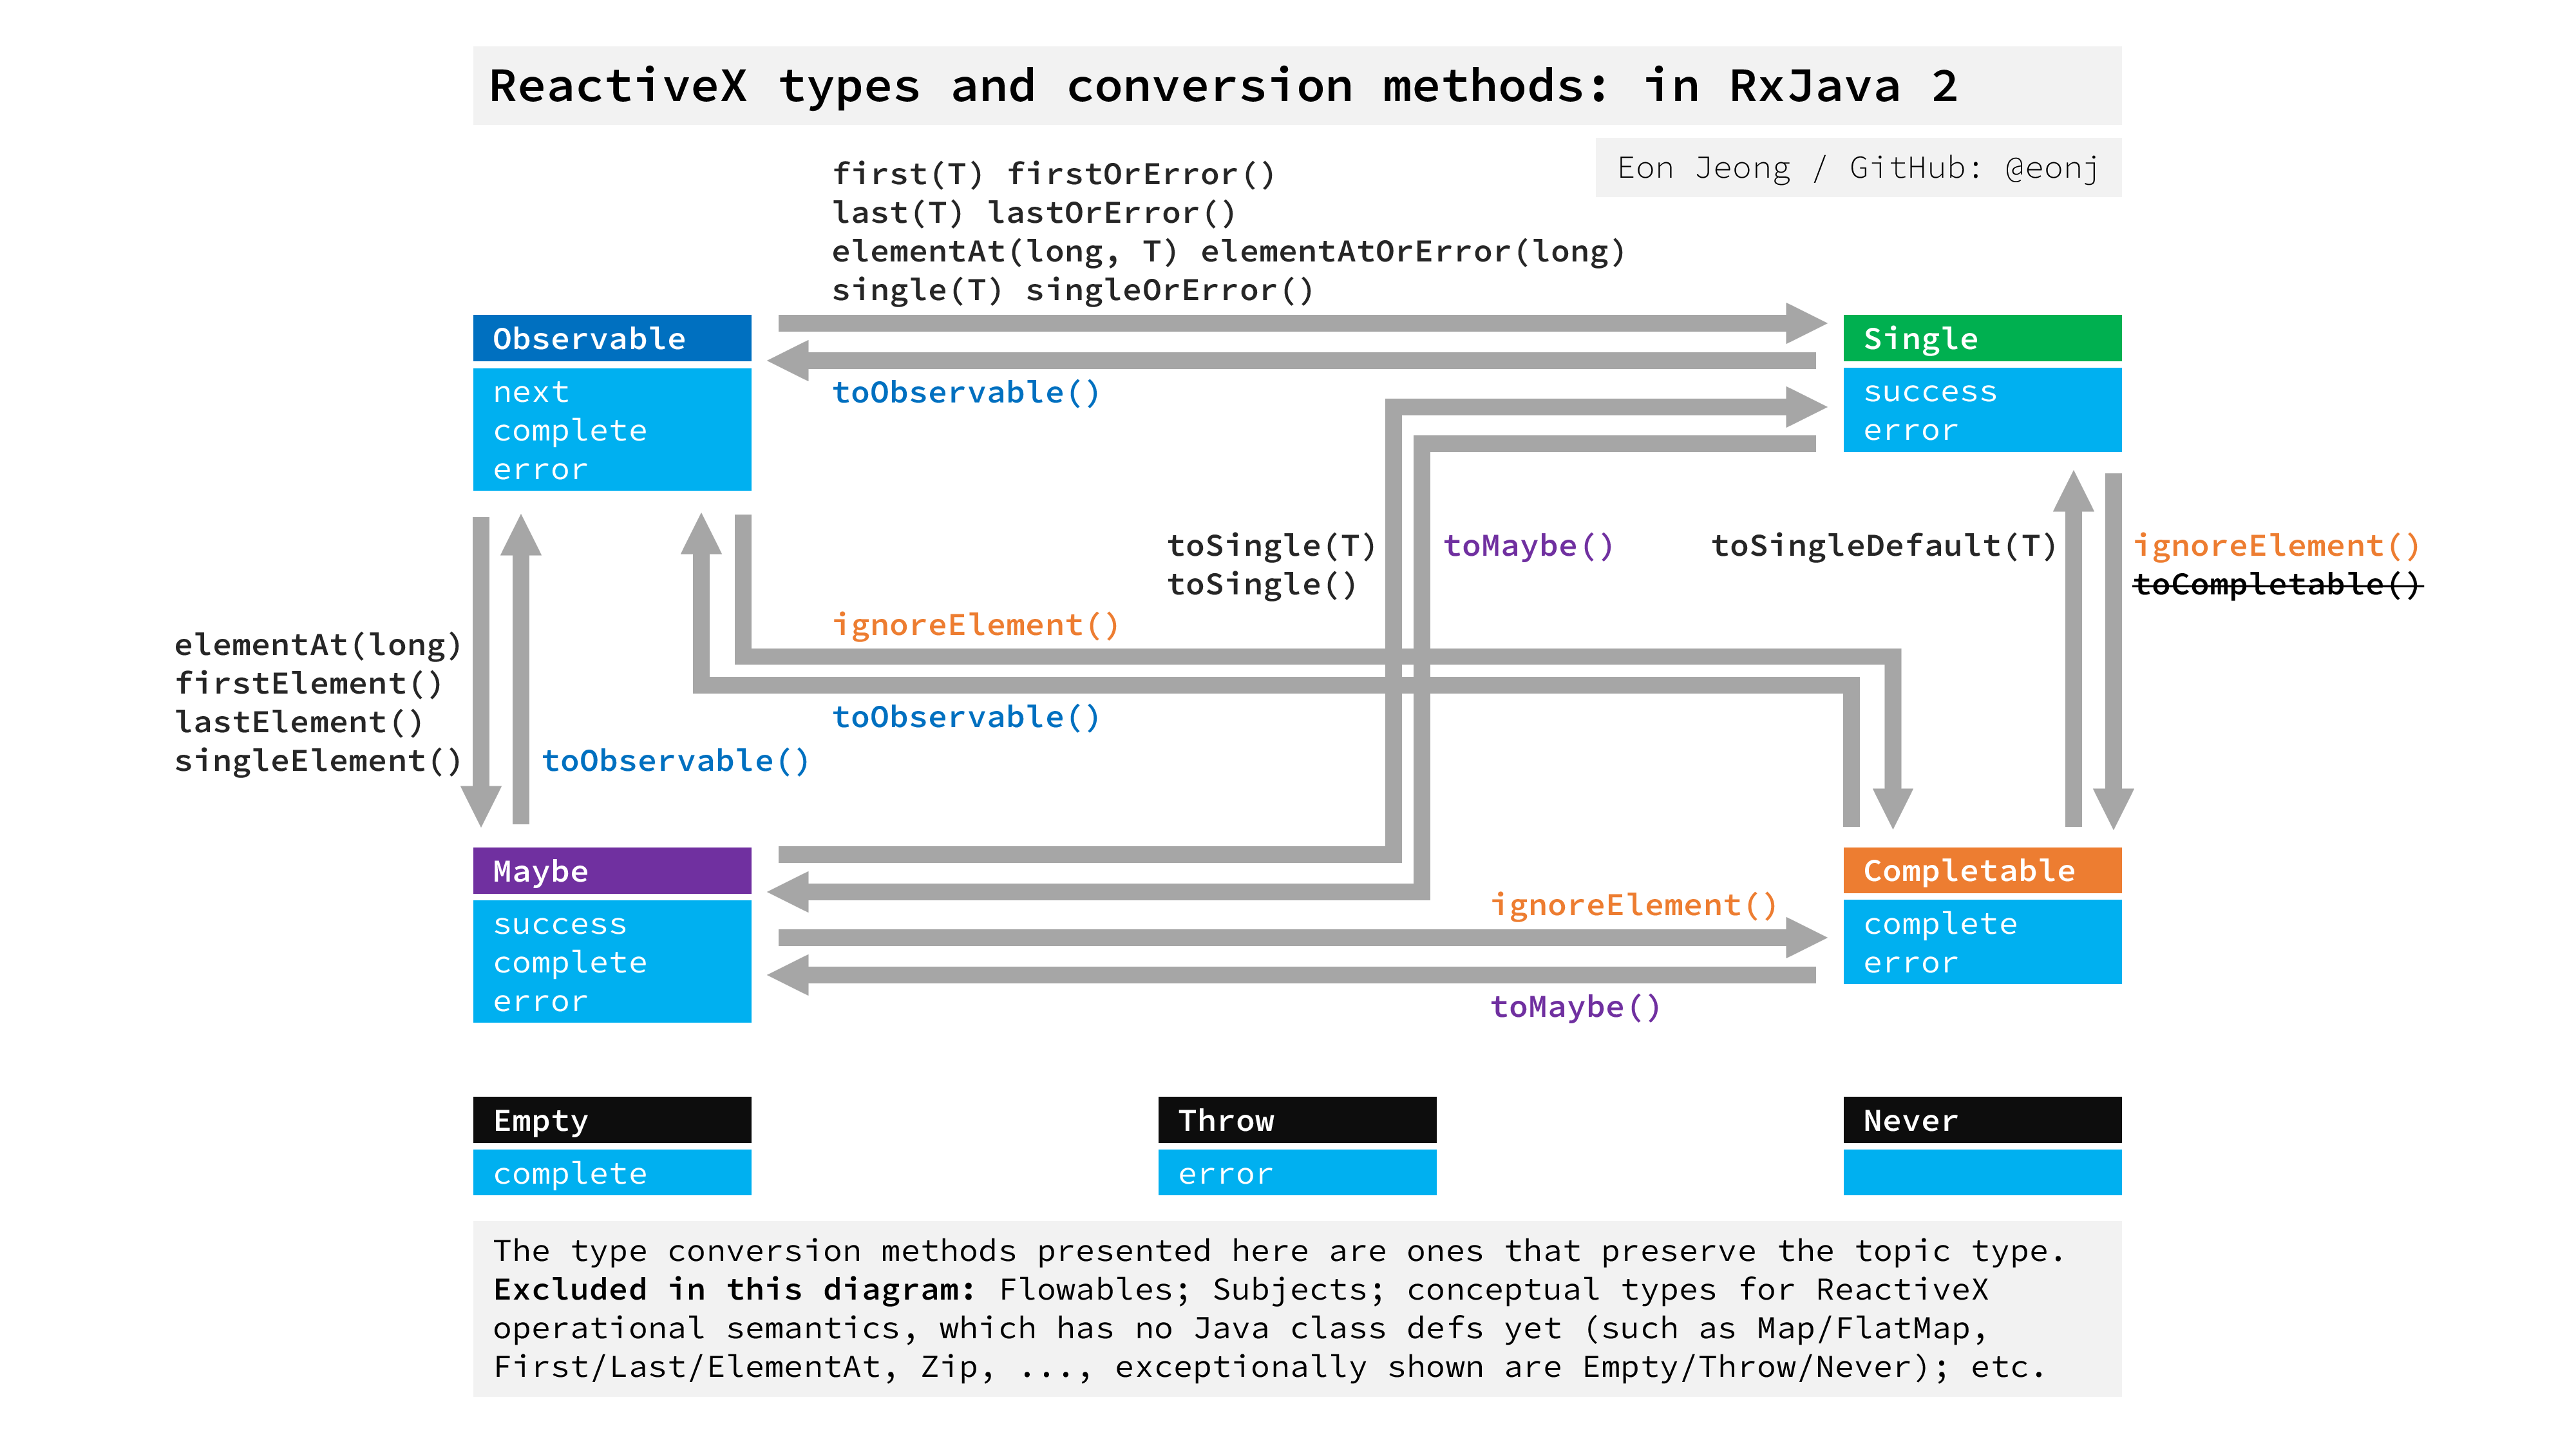 20200625.reactivex-types-and-conversion-methods-in-rxjava-2.300ppi